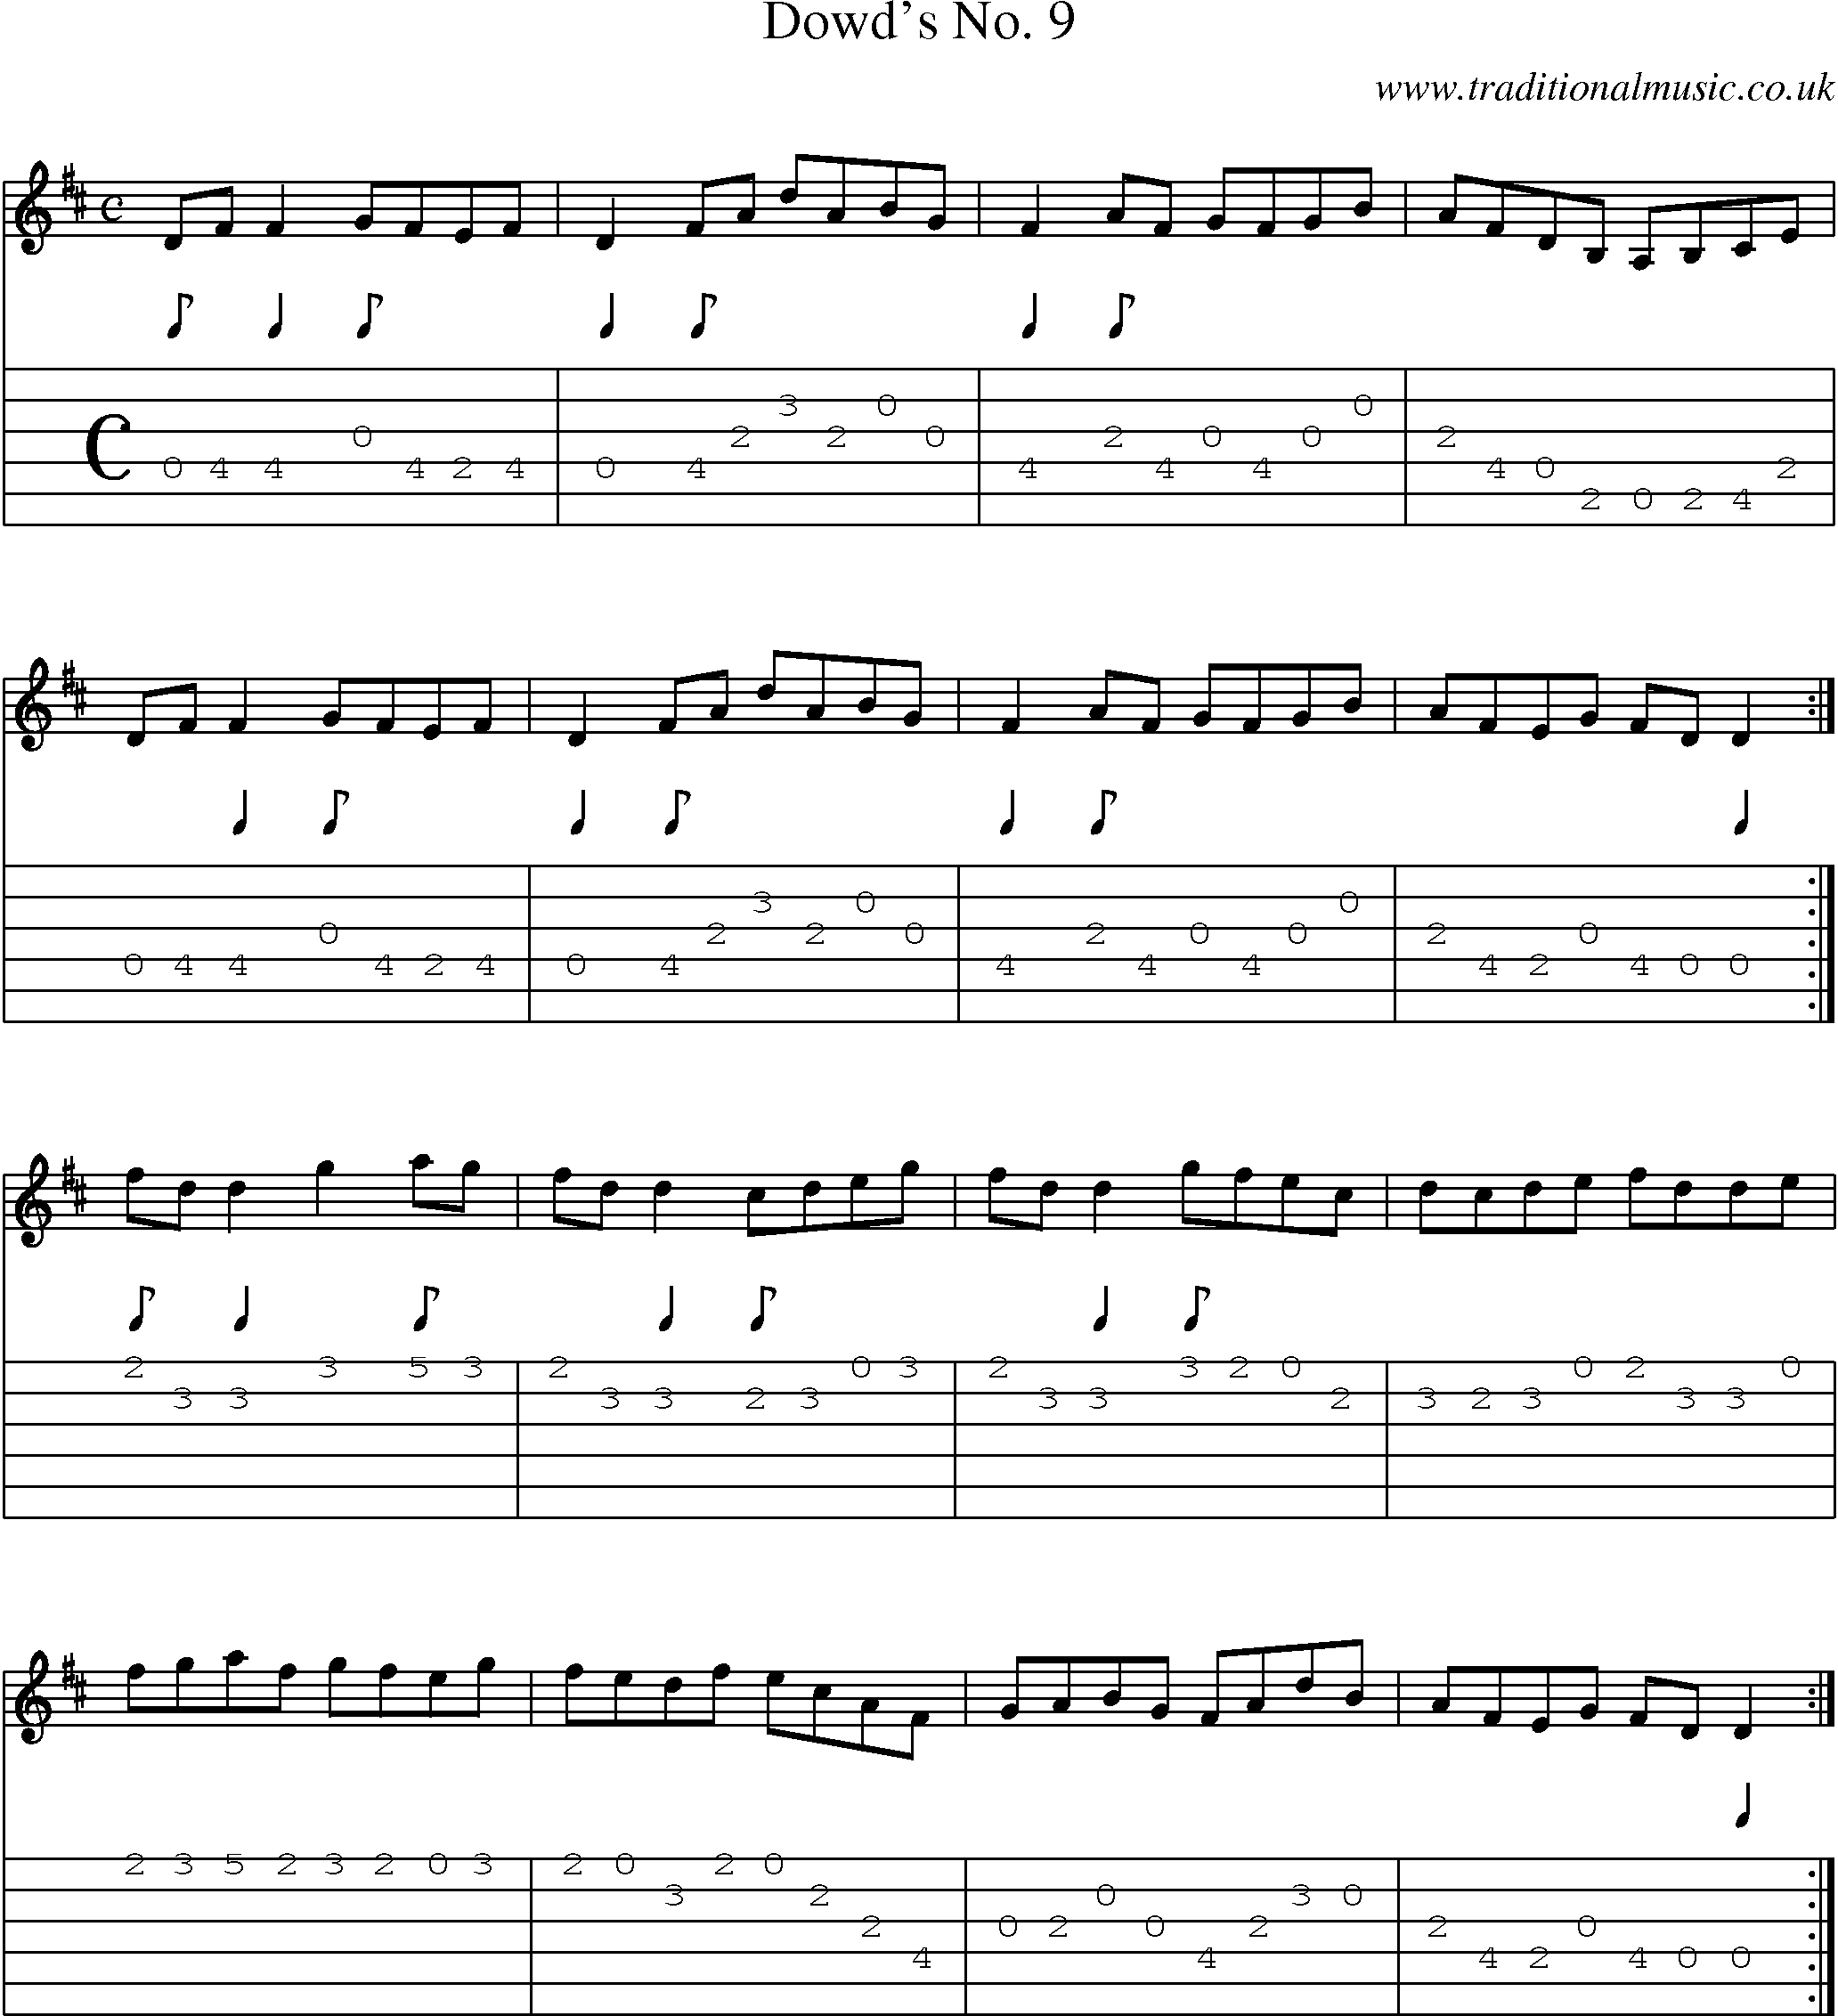 Music Score and Guitar Tabs for Dowds No 9